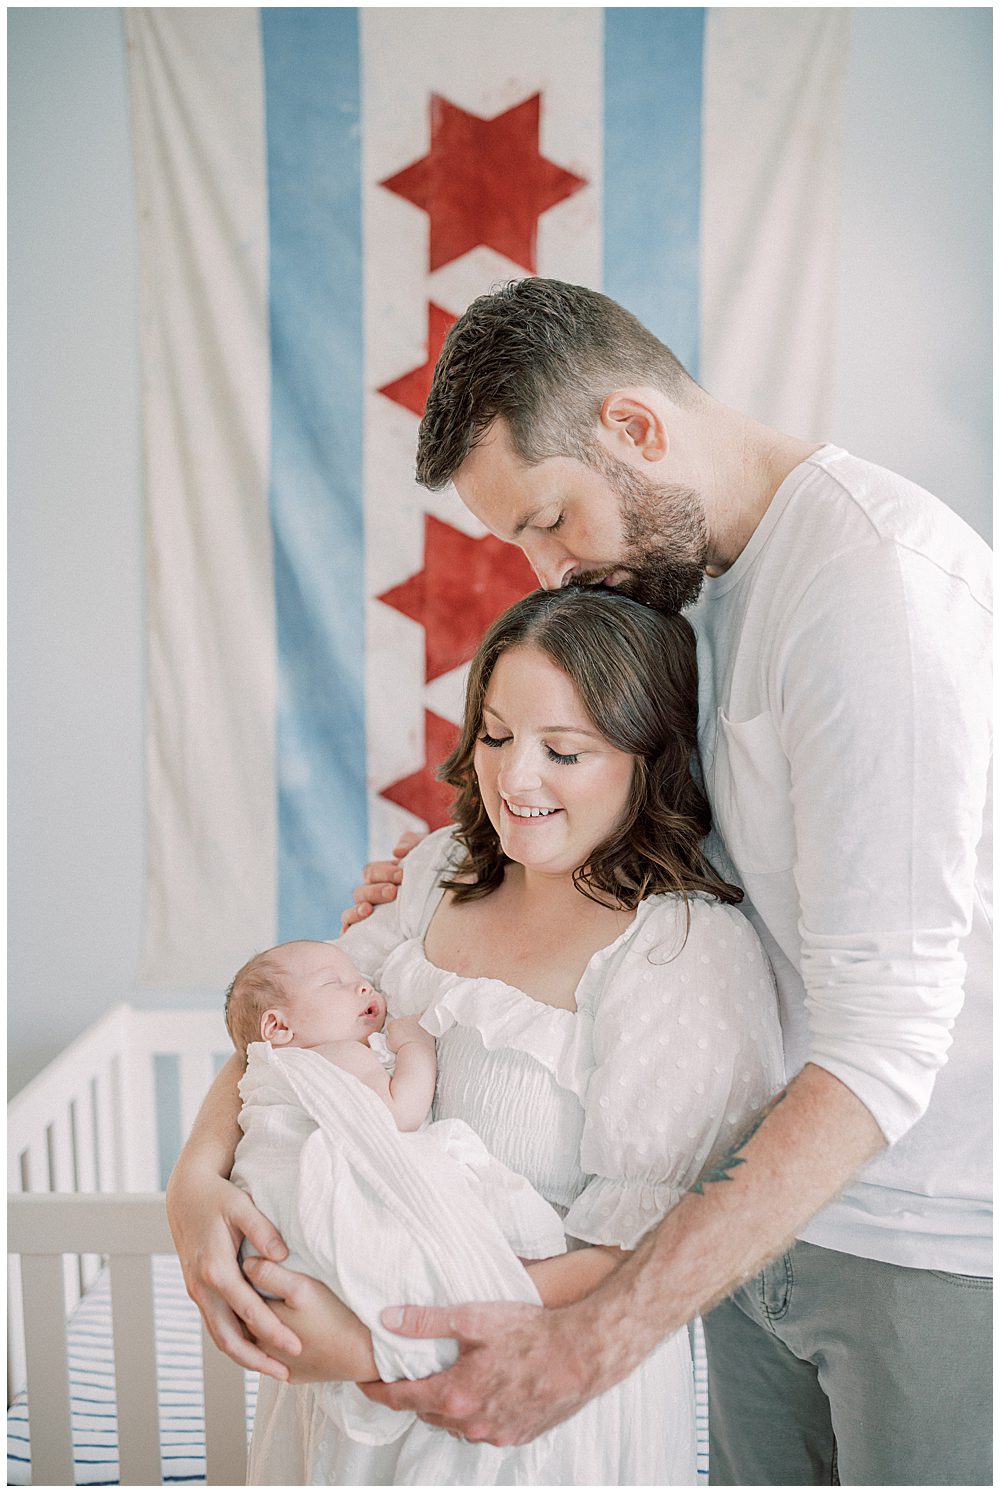 New dad leans over his wife and kisses her on the head while she holds their newborn baby in front of their Chicago-themed nursery